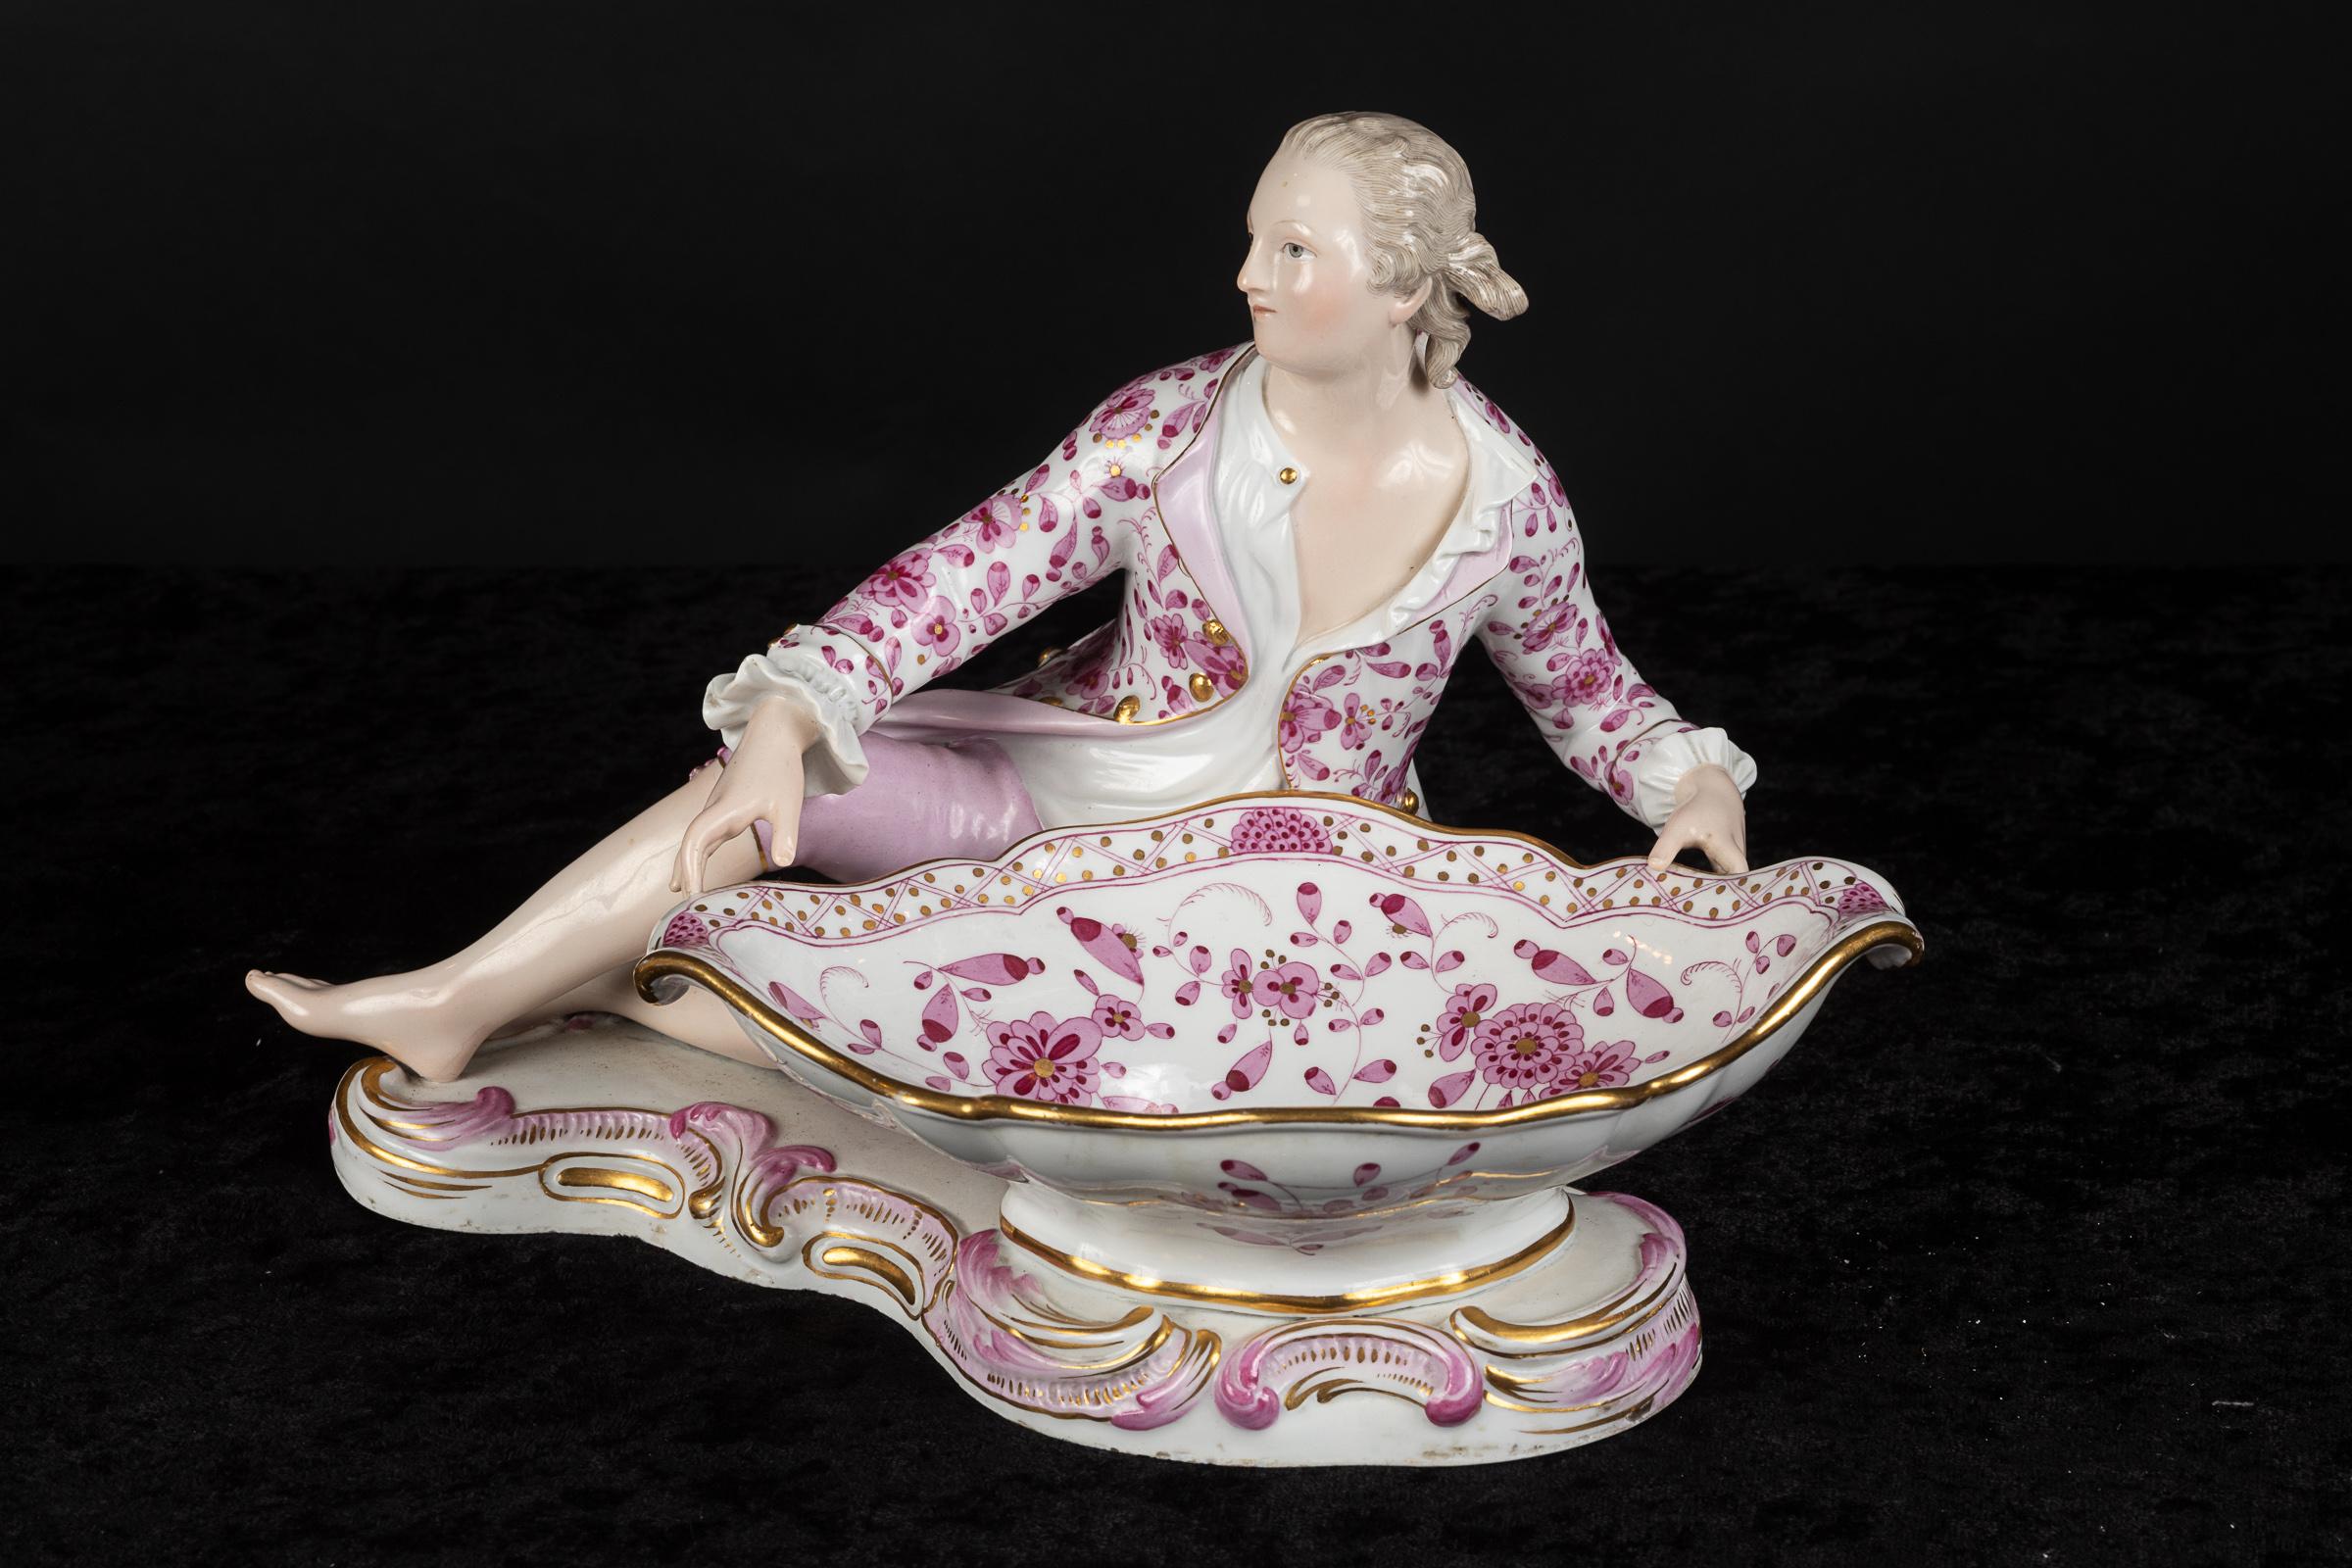 Pair of 19th century Meissen sweet meat dishes: one in the form of a reclining gentleman, the other in the form of a reclining lady with one bare breast – the style of the 18th century.  The sweet meat dishes are exquisitely decorated with rose, and